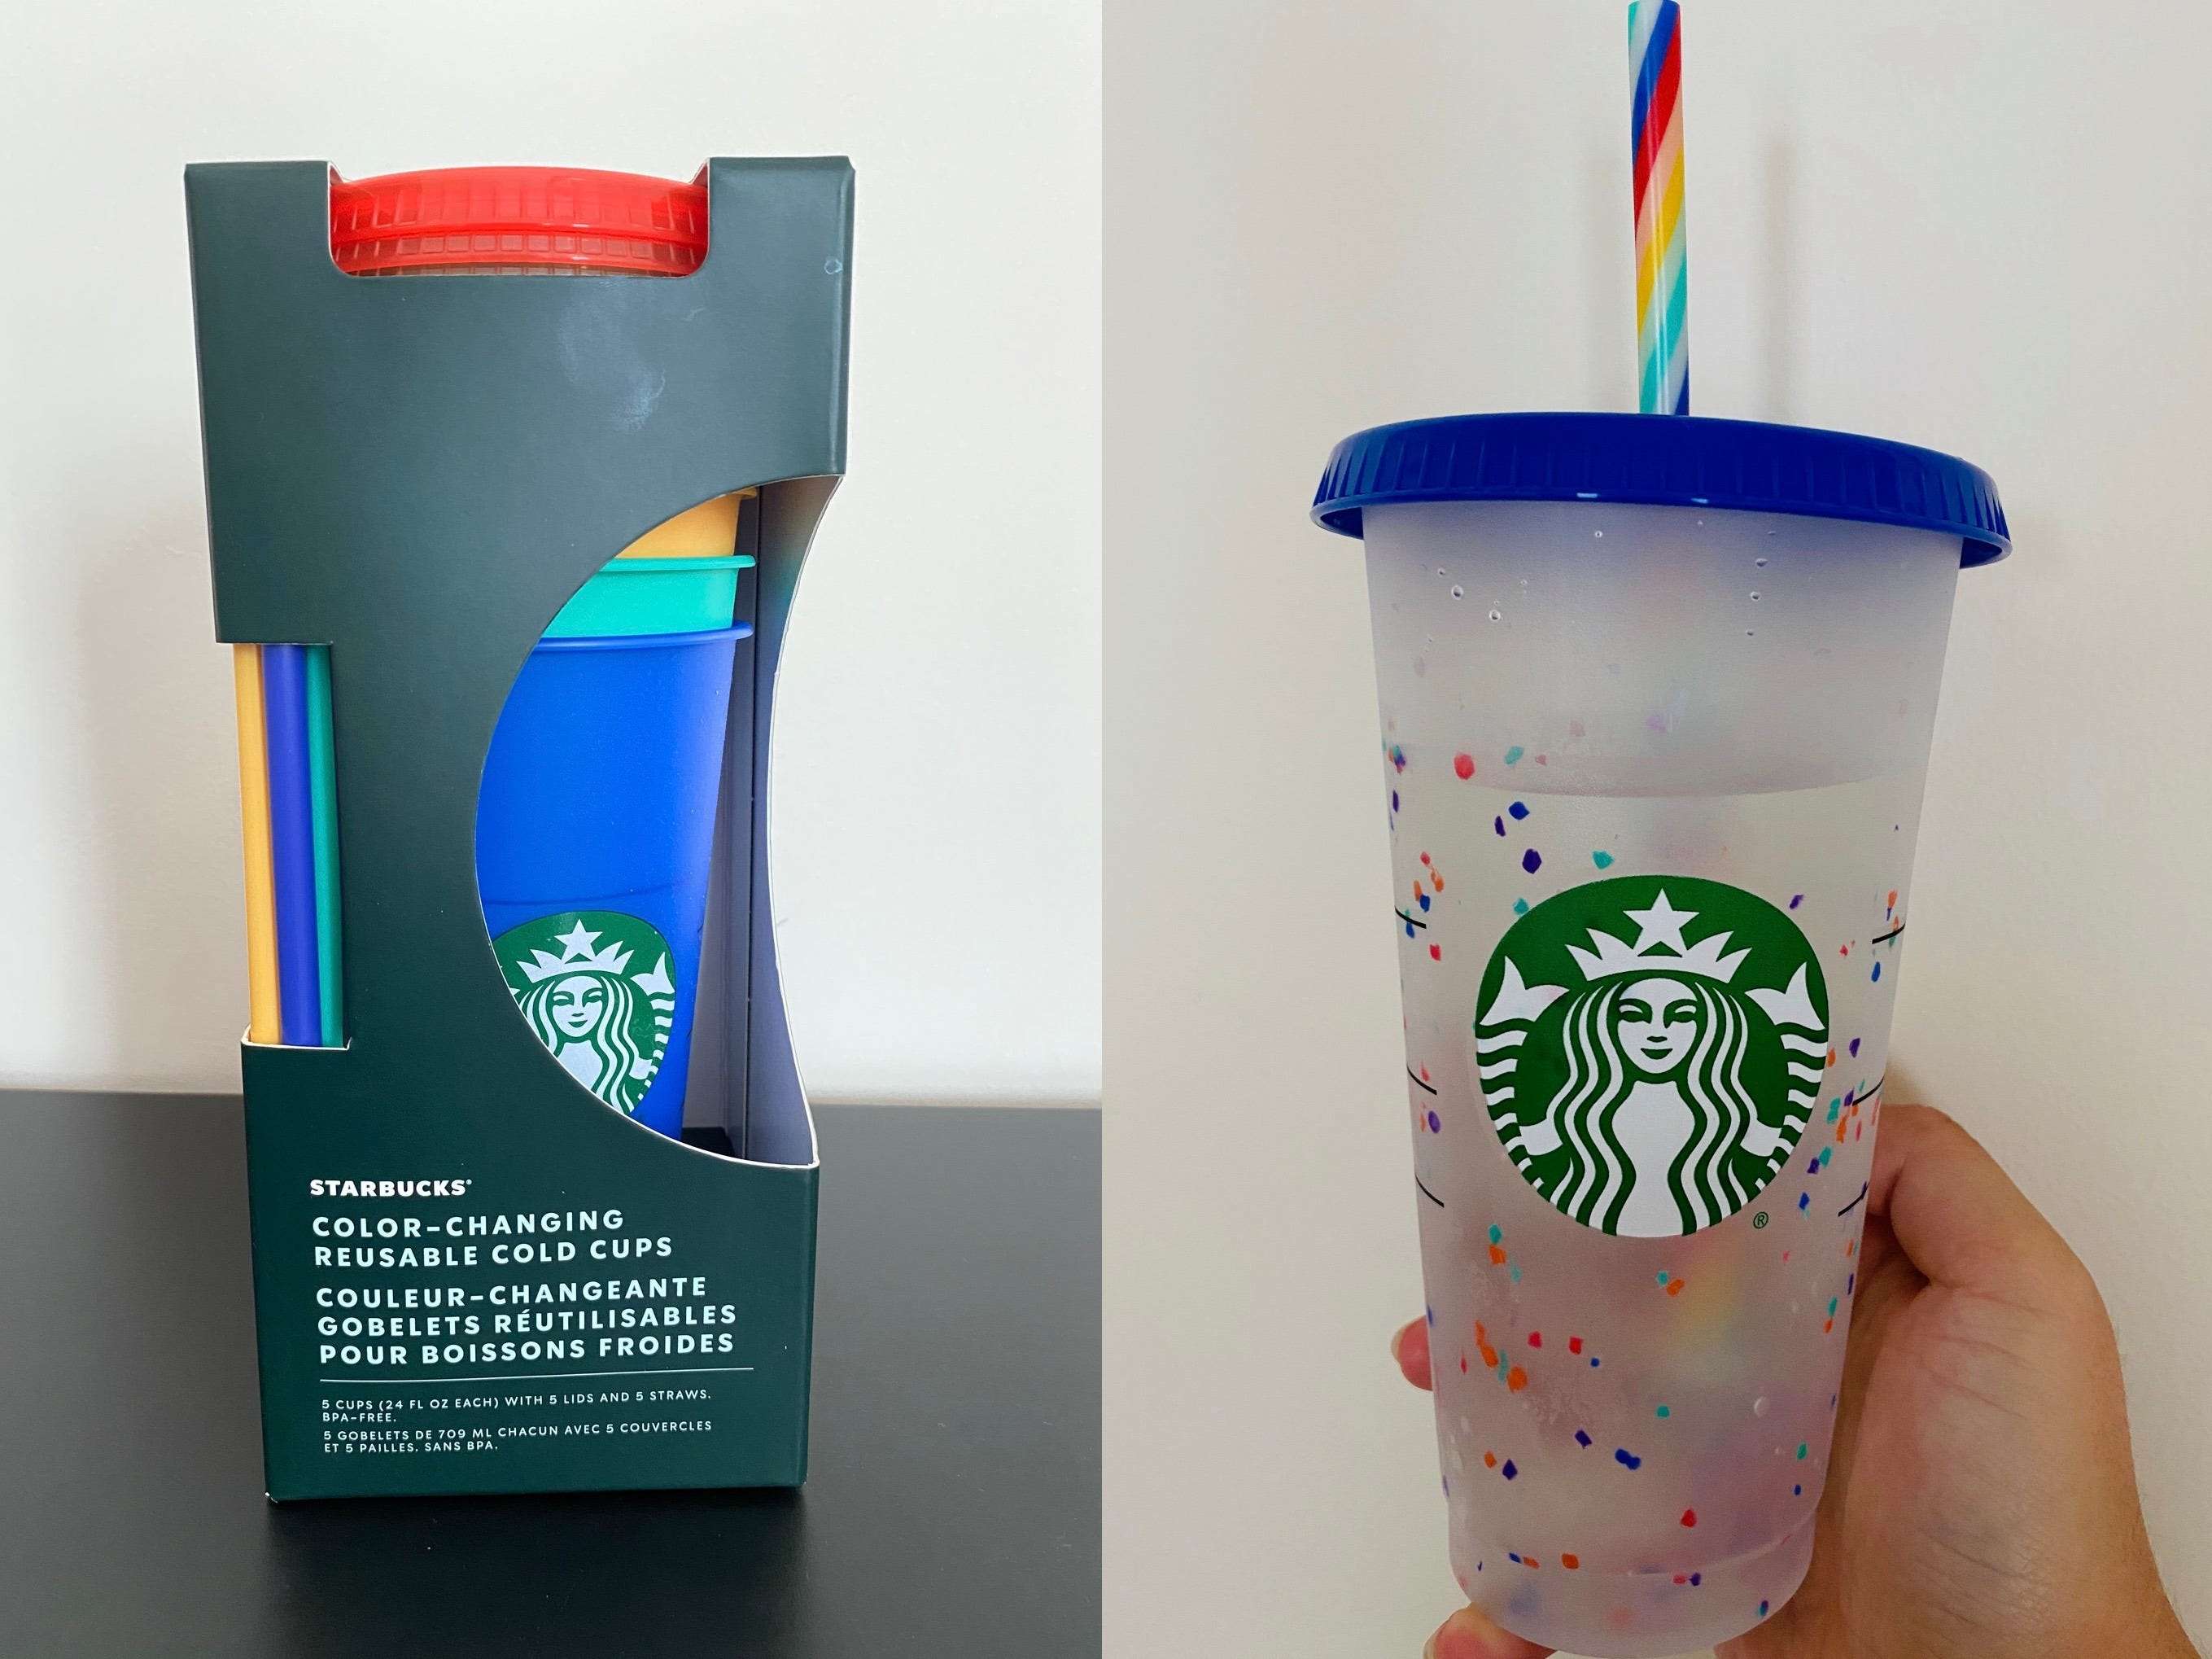 https://www.businessinsider.in/photo/76075076/starbucks-reusable-cups-sales-are-exploding-on-resale-sites-as-people-pay-5-times-original-prices-for-a-sense-of-coffee-shop-normalcy.jpg?imgsize=356557